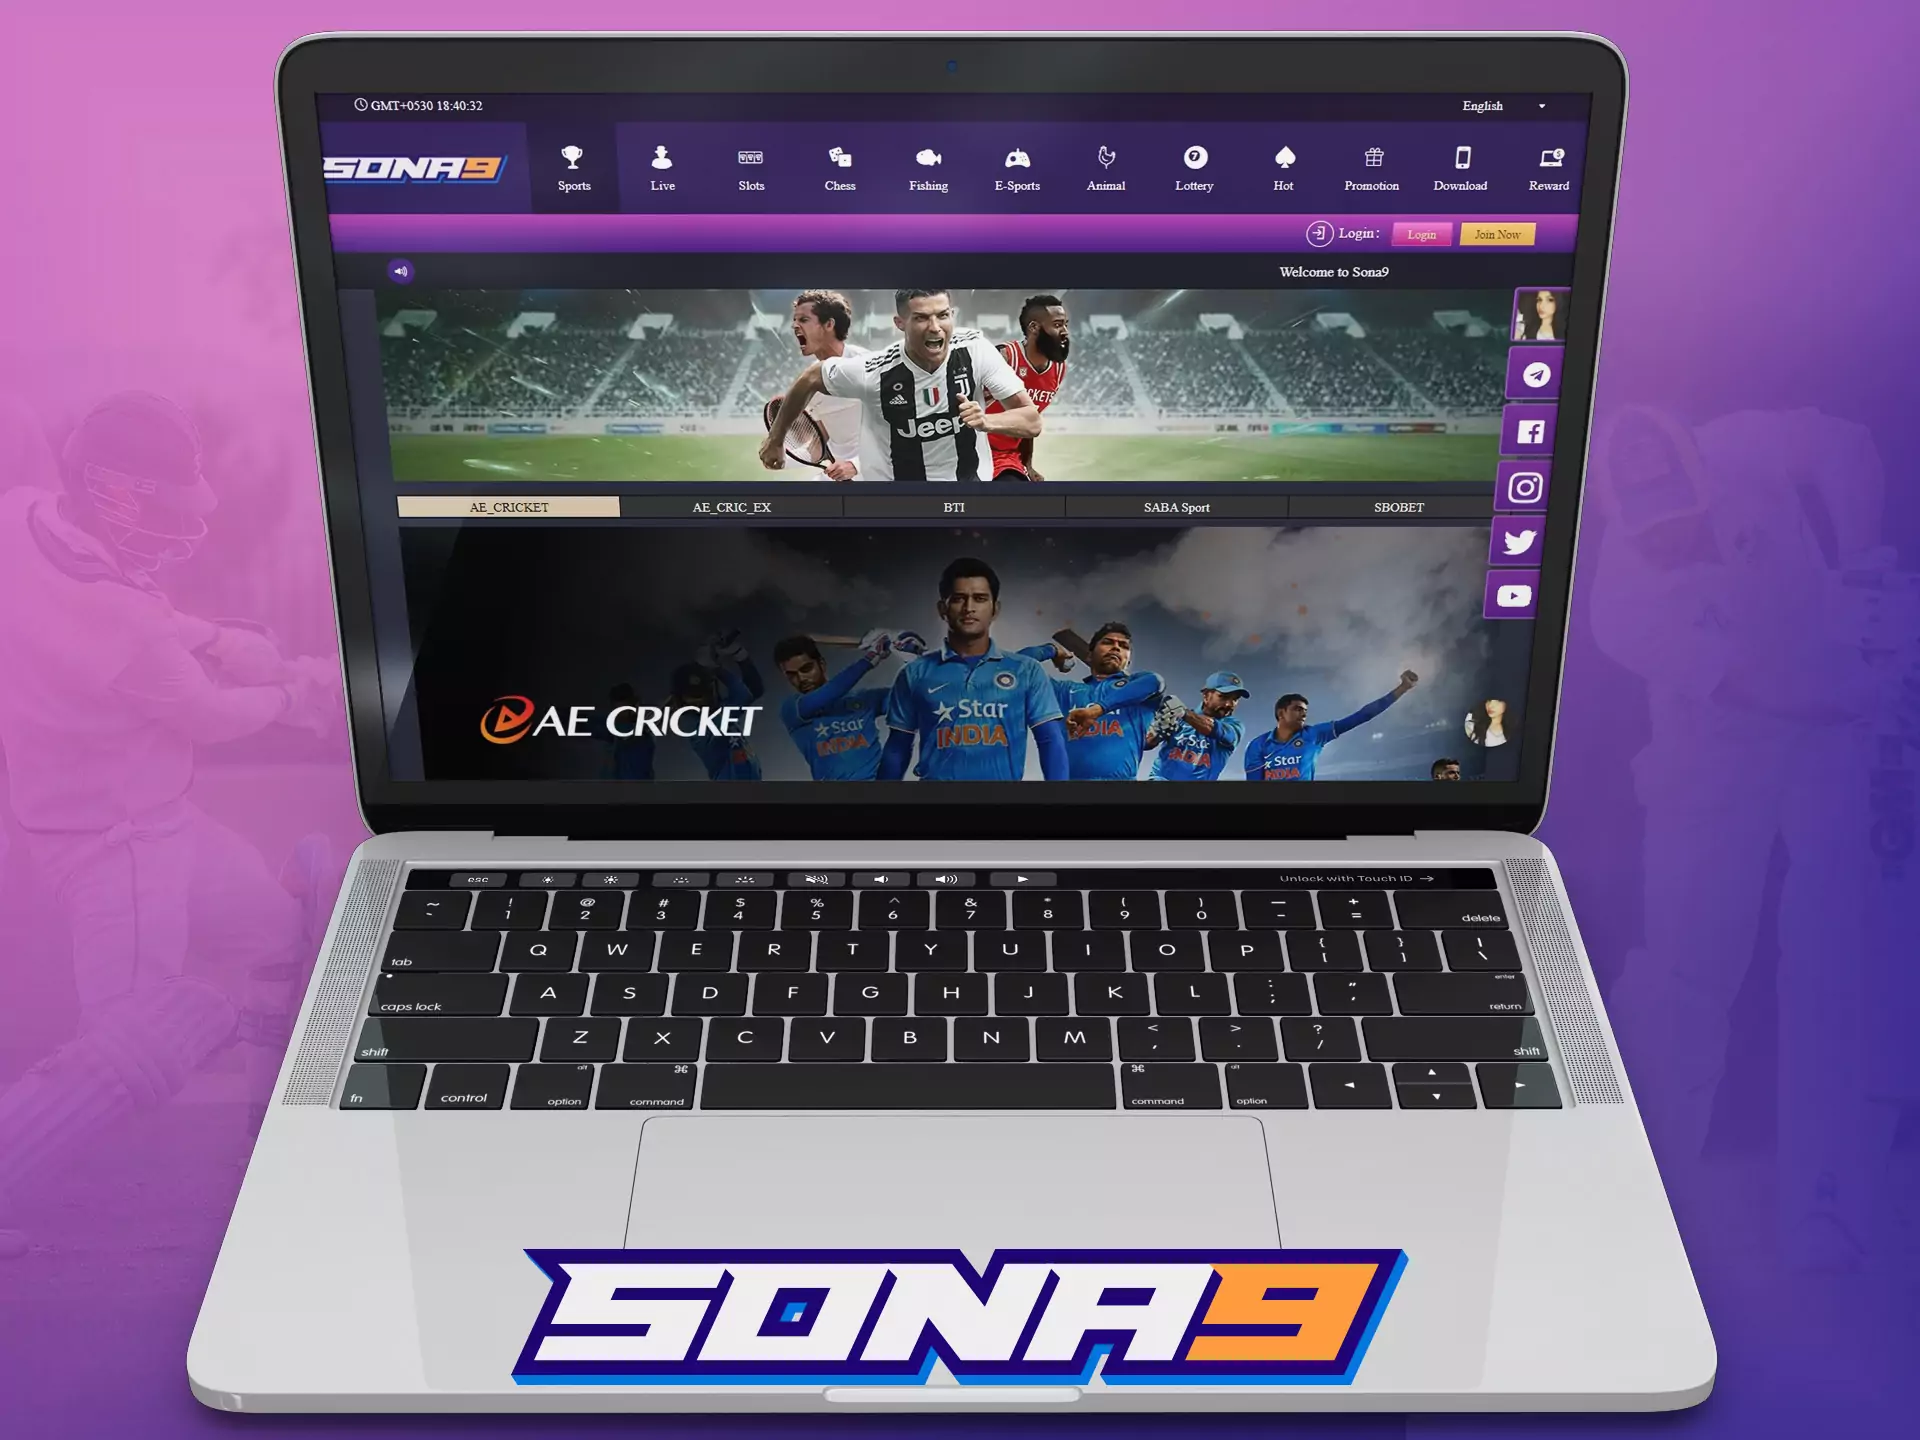 Sona9 has a cool website that works great on all PC devices.